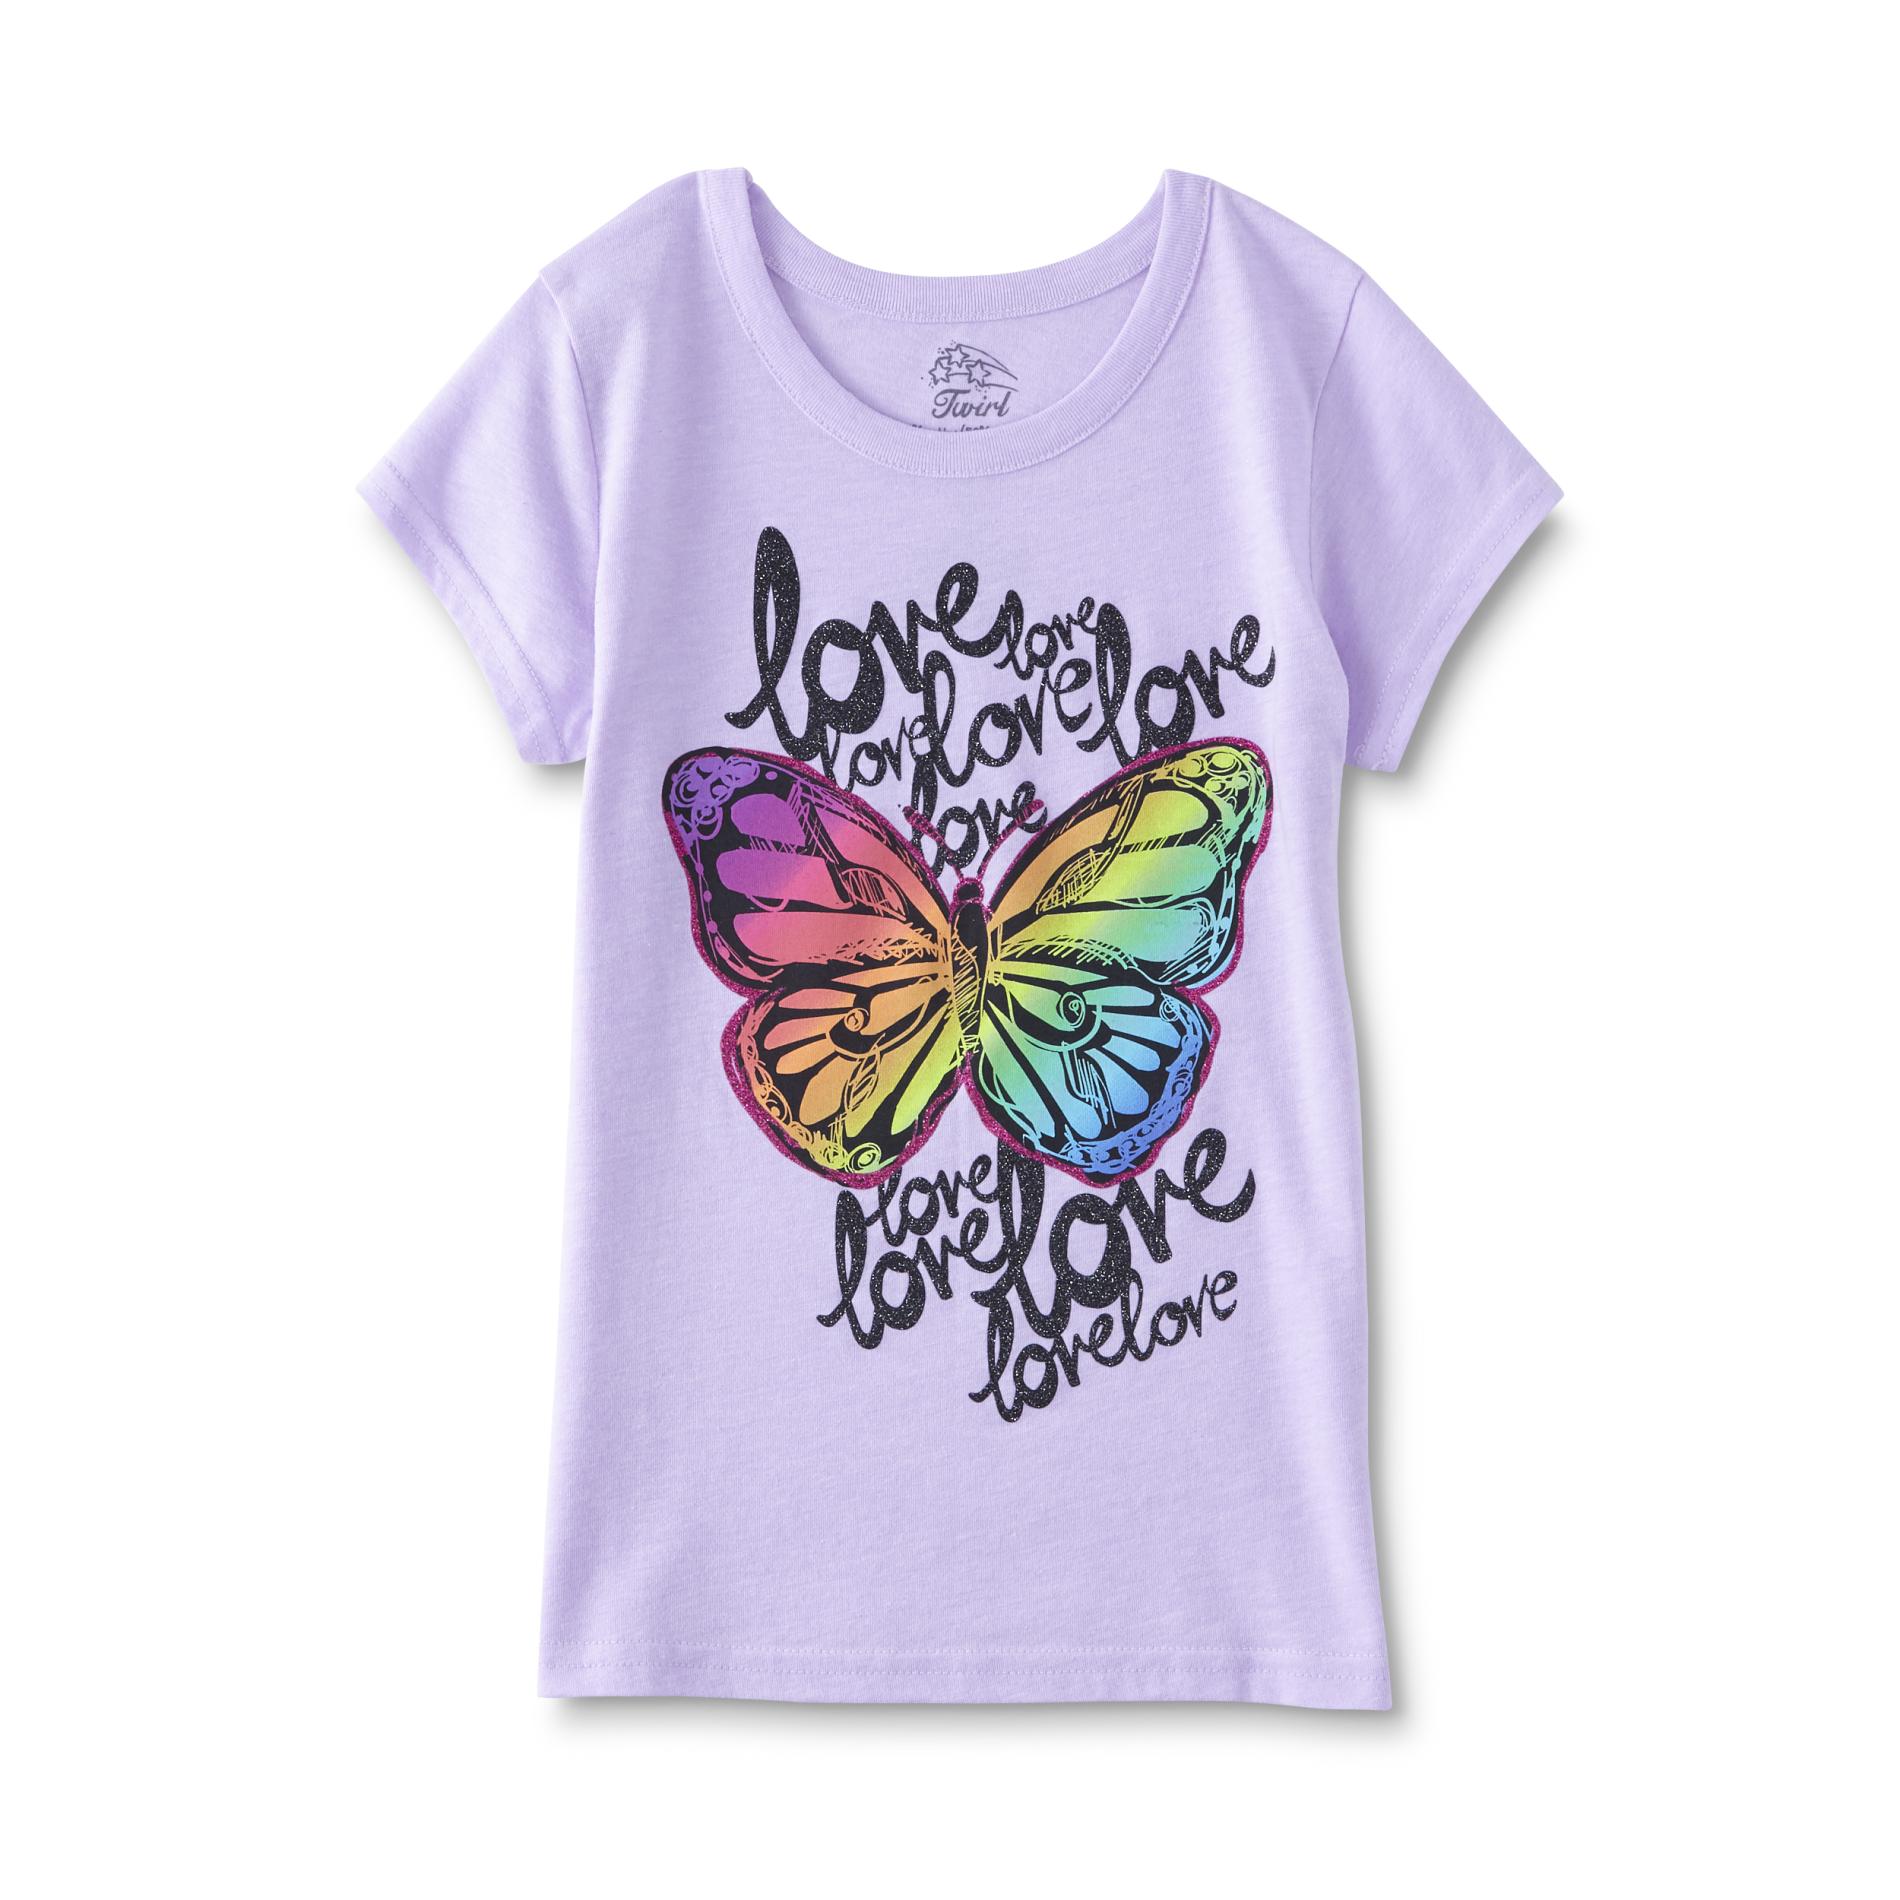 Route 66 Girls' Graphic T-Shirt - Butterfly Love